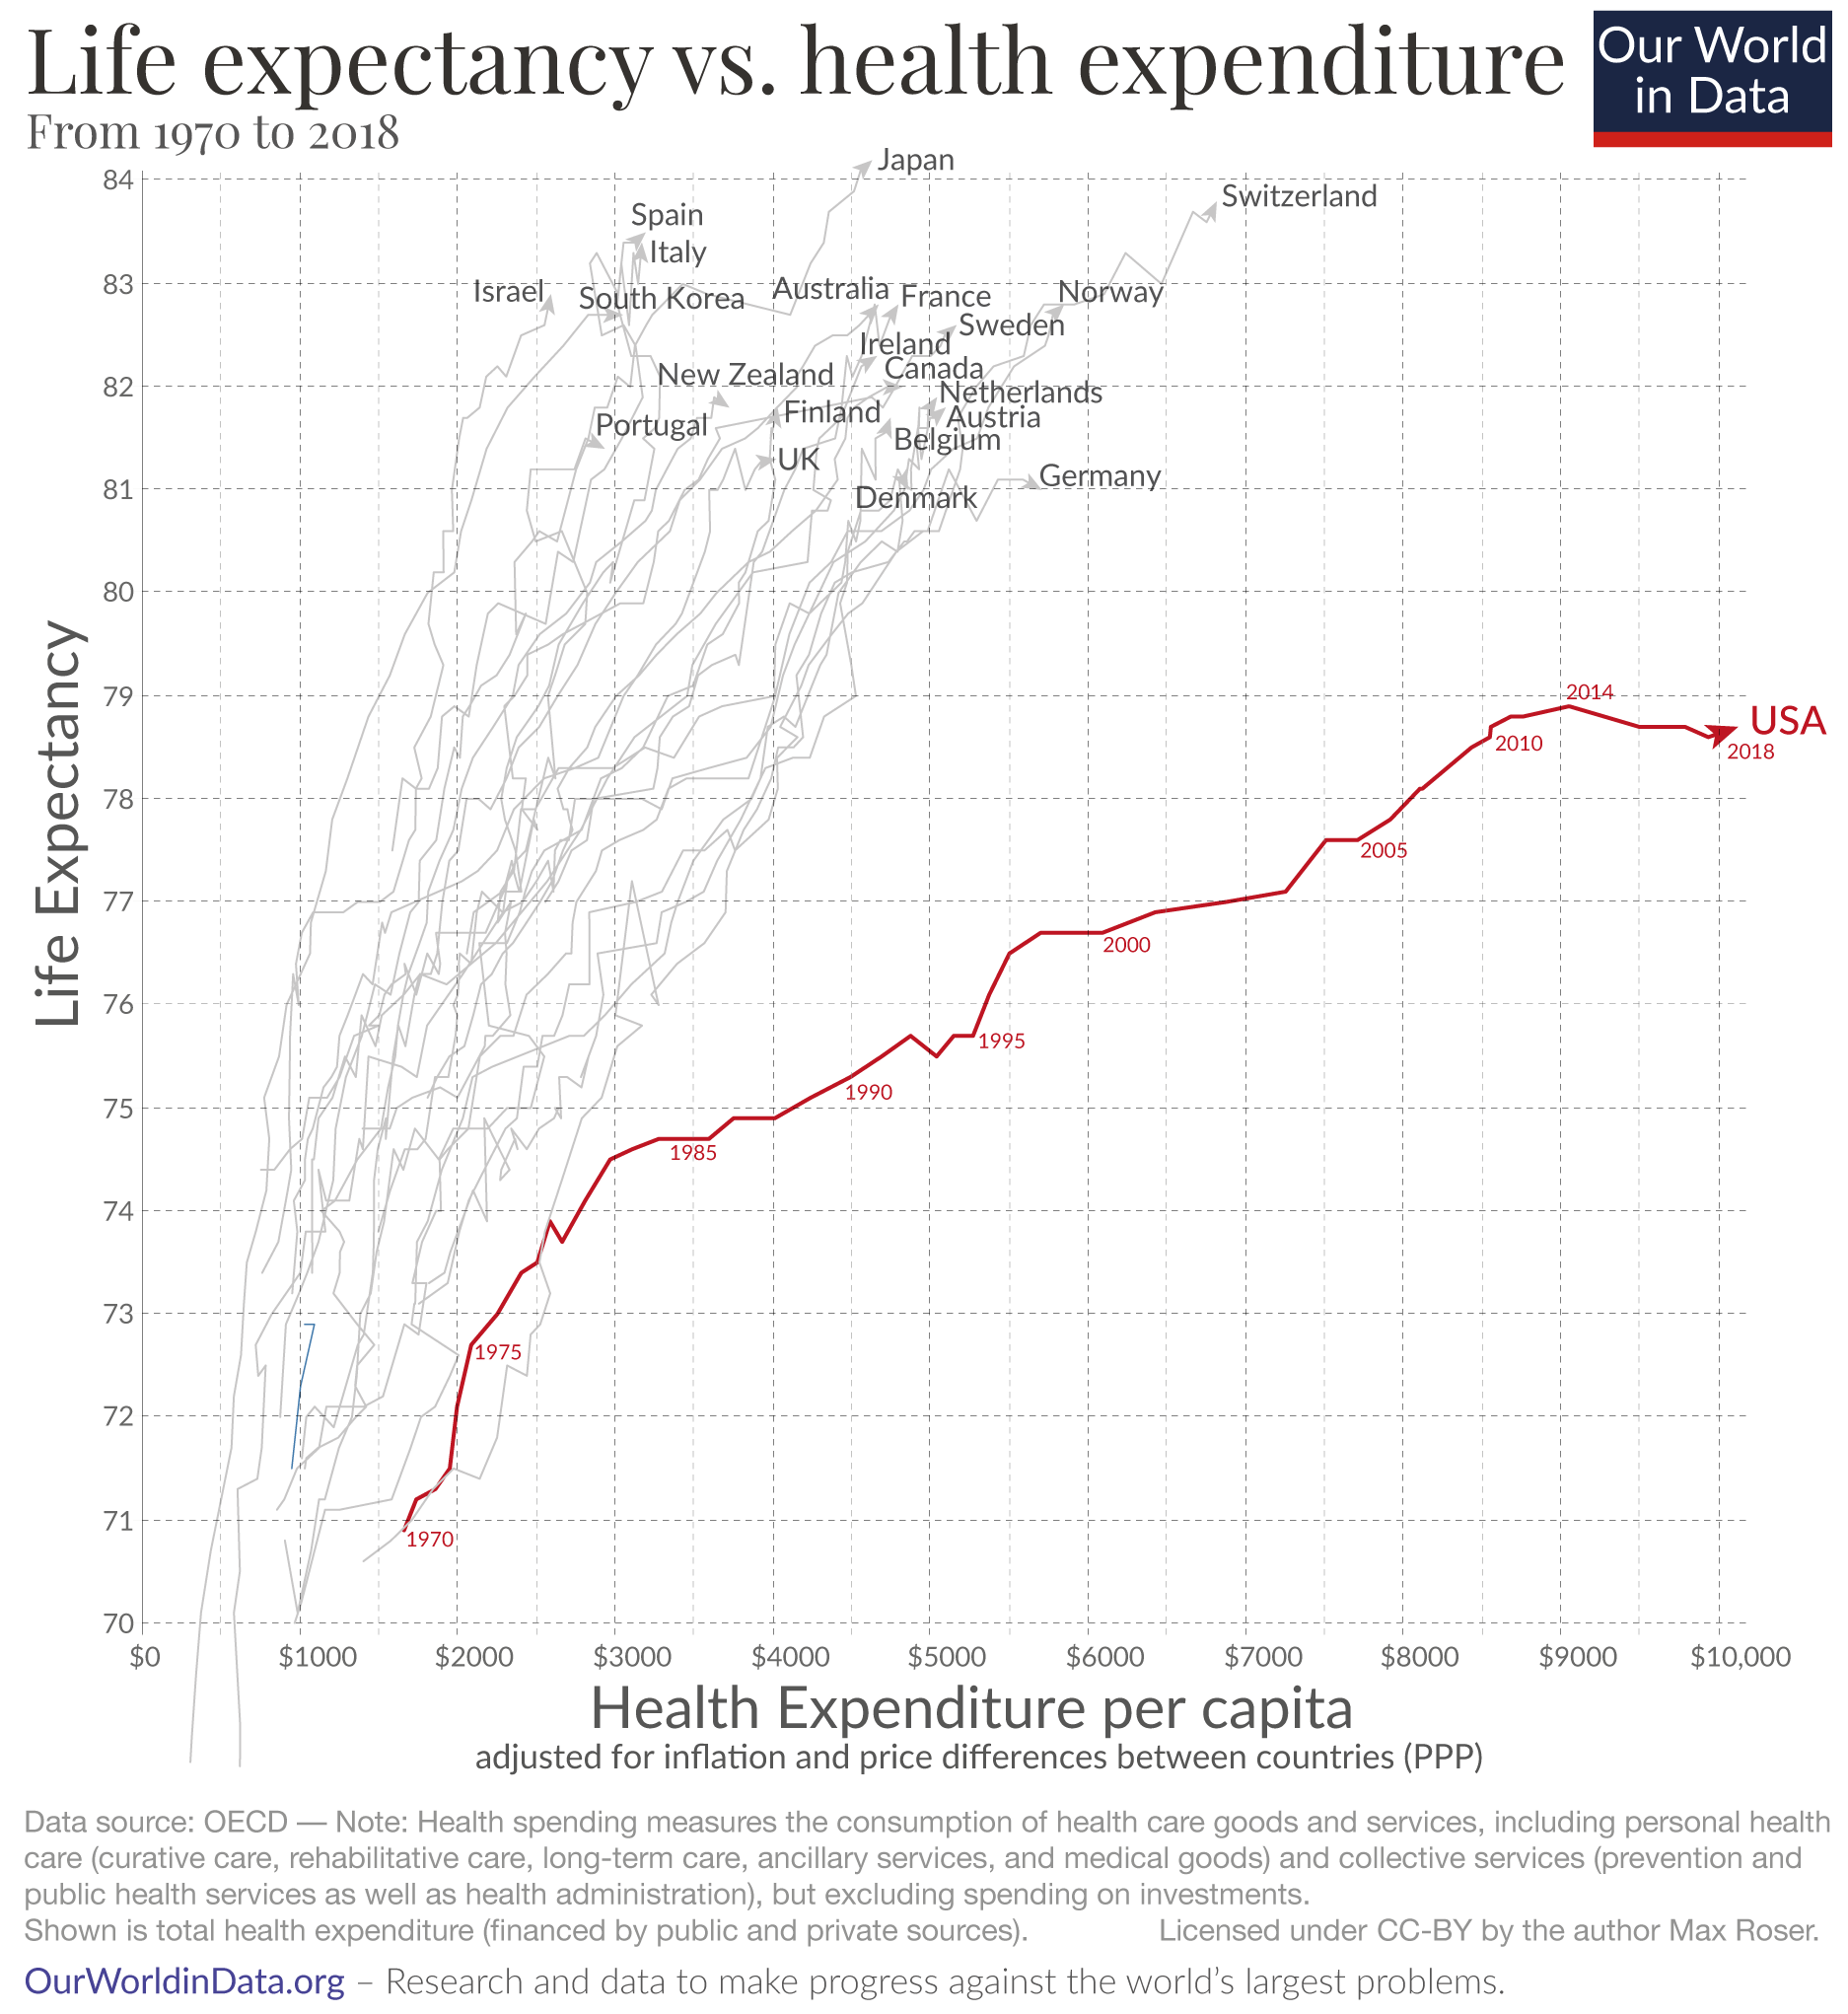 Scatter plot of life expectancy and health expenditure per capita, with each country between 1970 and 2018 represented as a line, the USA in red and other OECD countries in grey. Starting in the early 1980s, other OECD countries have increased their life expectancies by a lot with limited increases in health expenditures per capita. The USA has started to spend much more on life expectancy, but its life expectancy has increased far less.